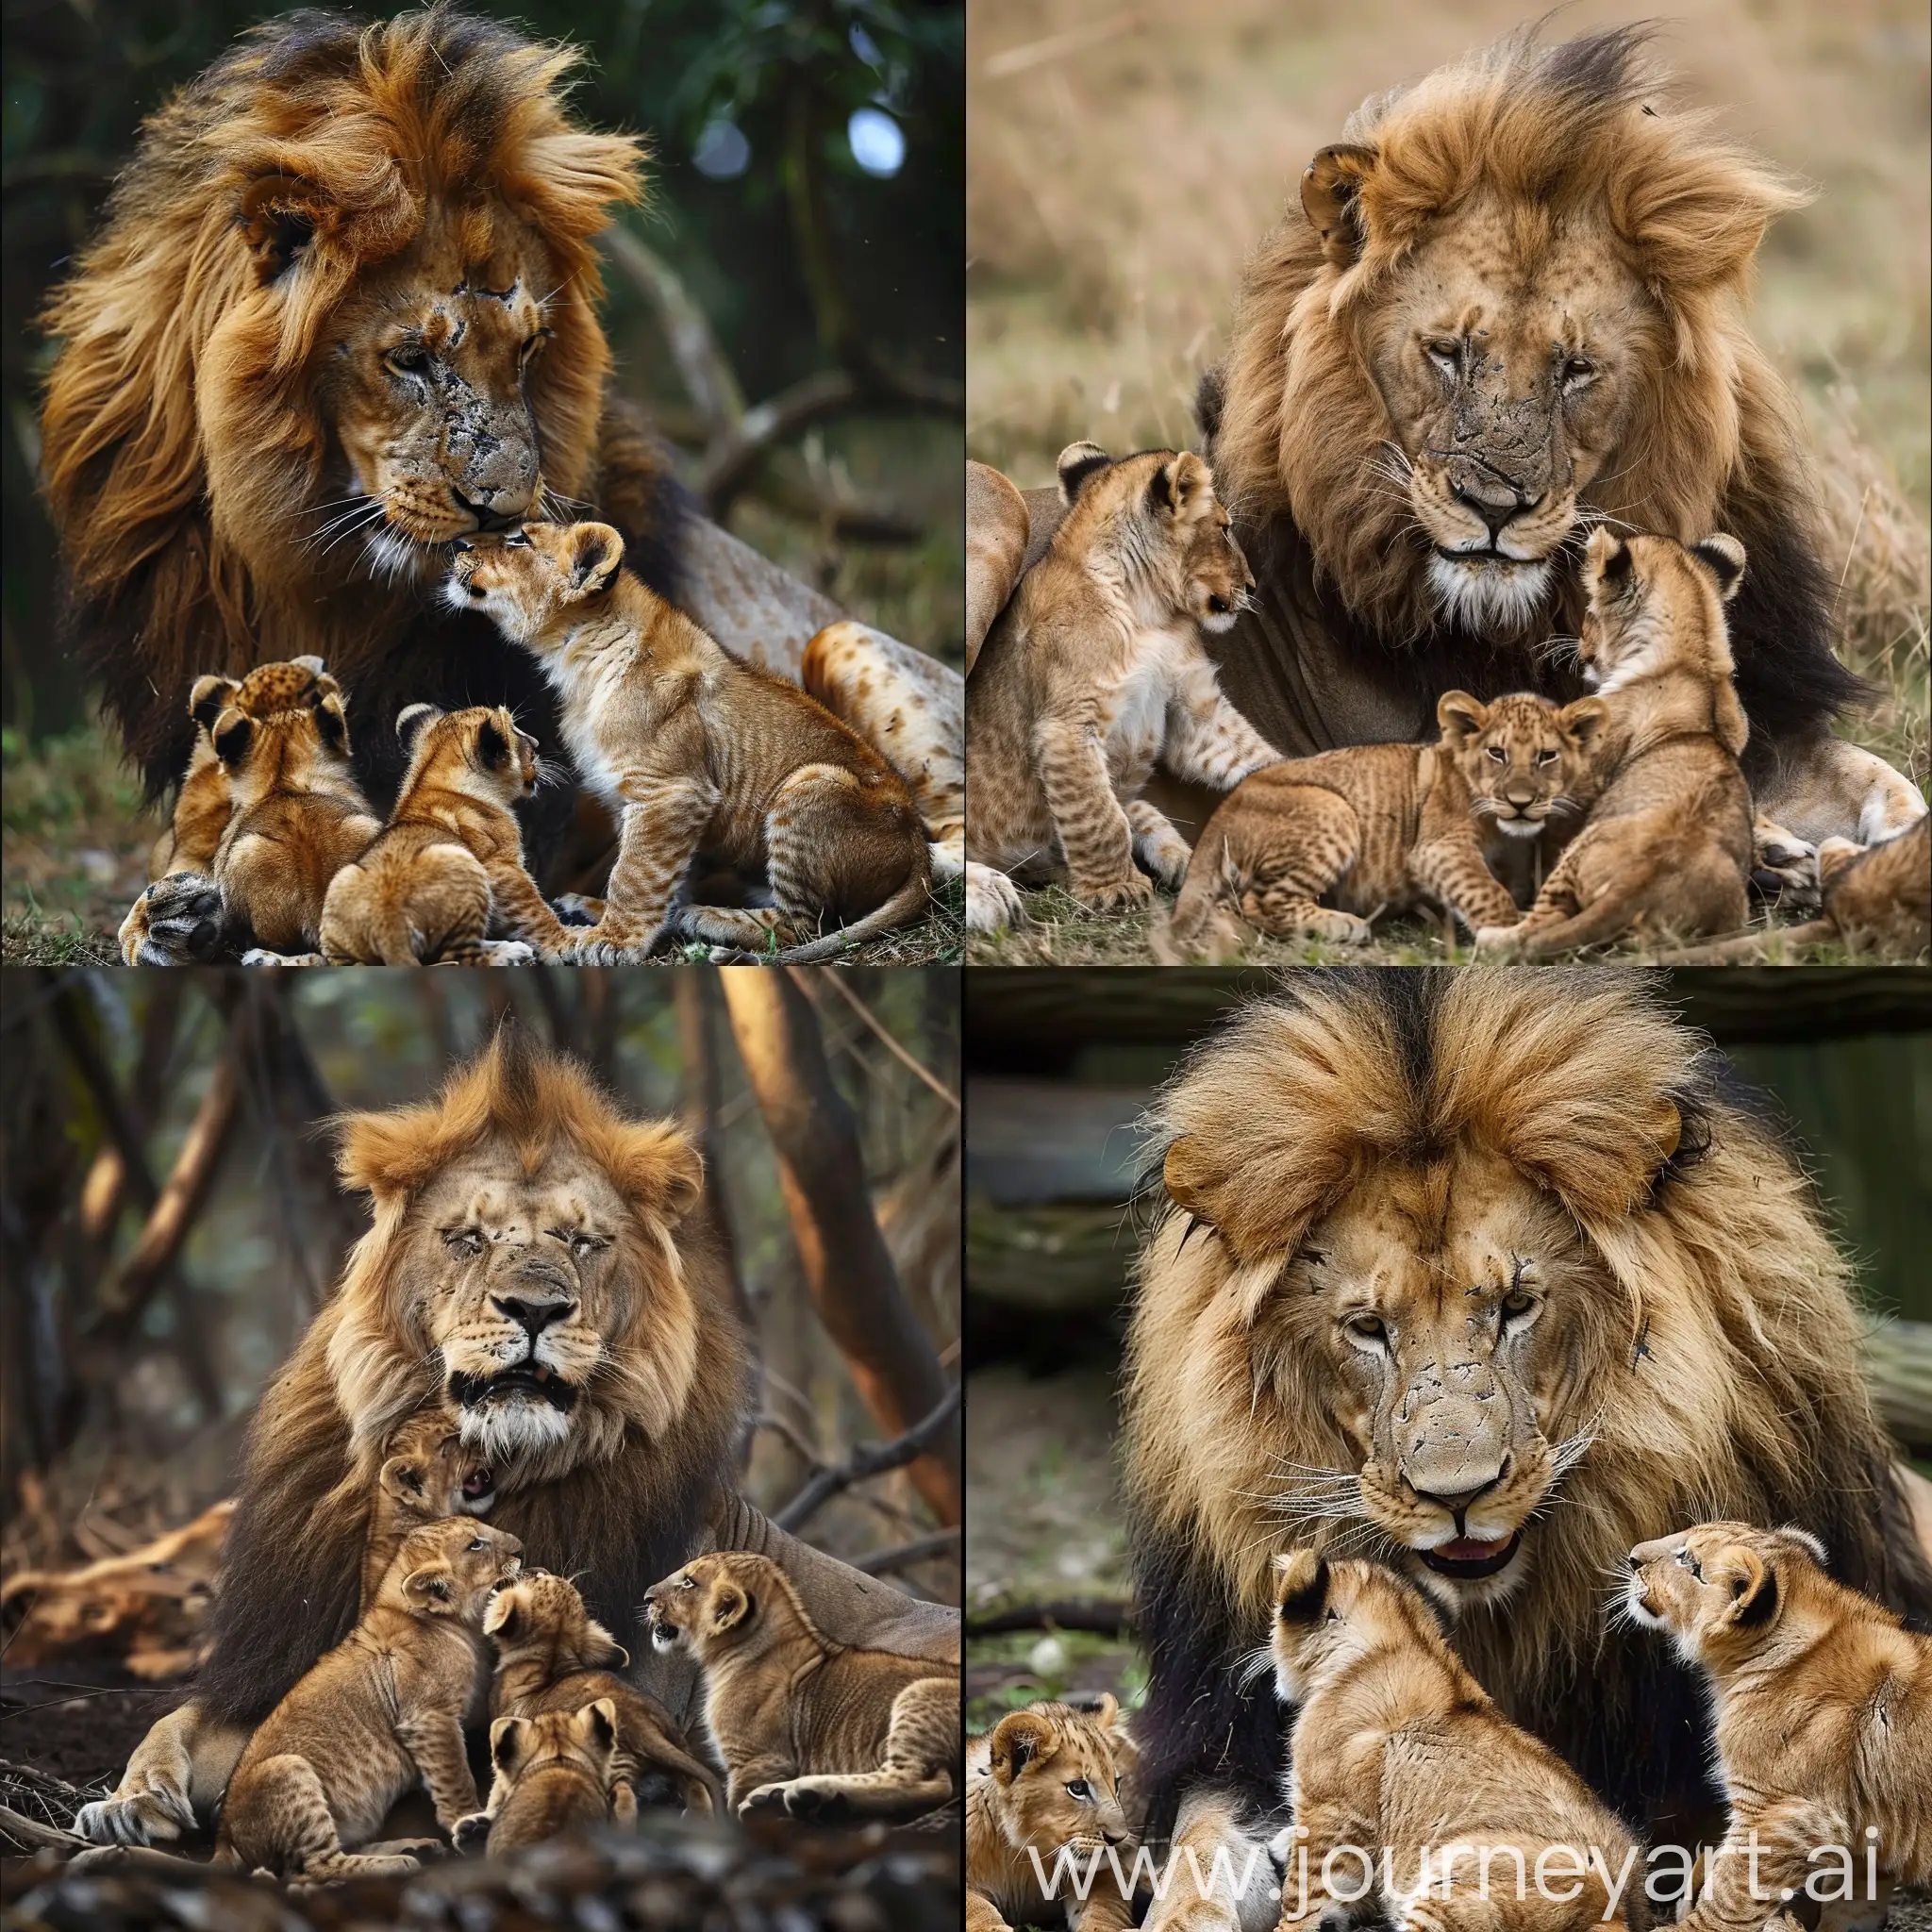 Lioness-Engaging-in-Playful-Interaction-with-Her-Adorable-Cubs